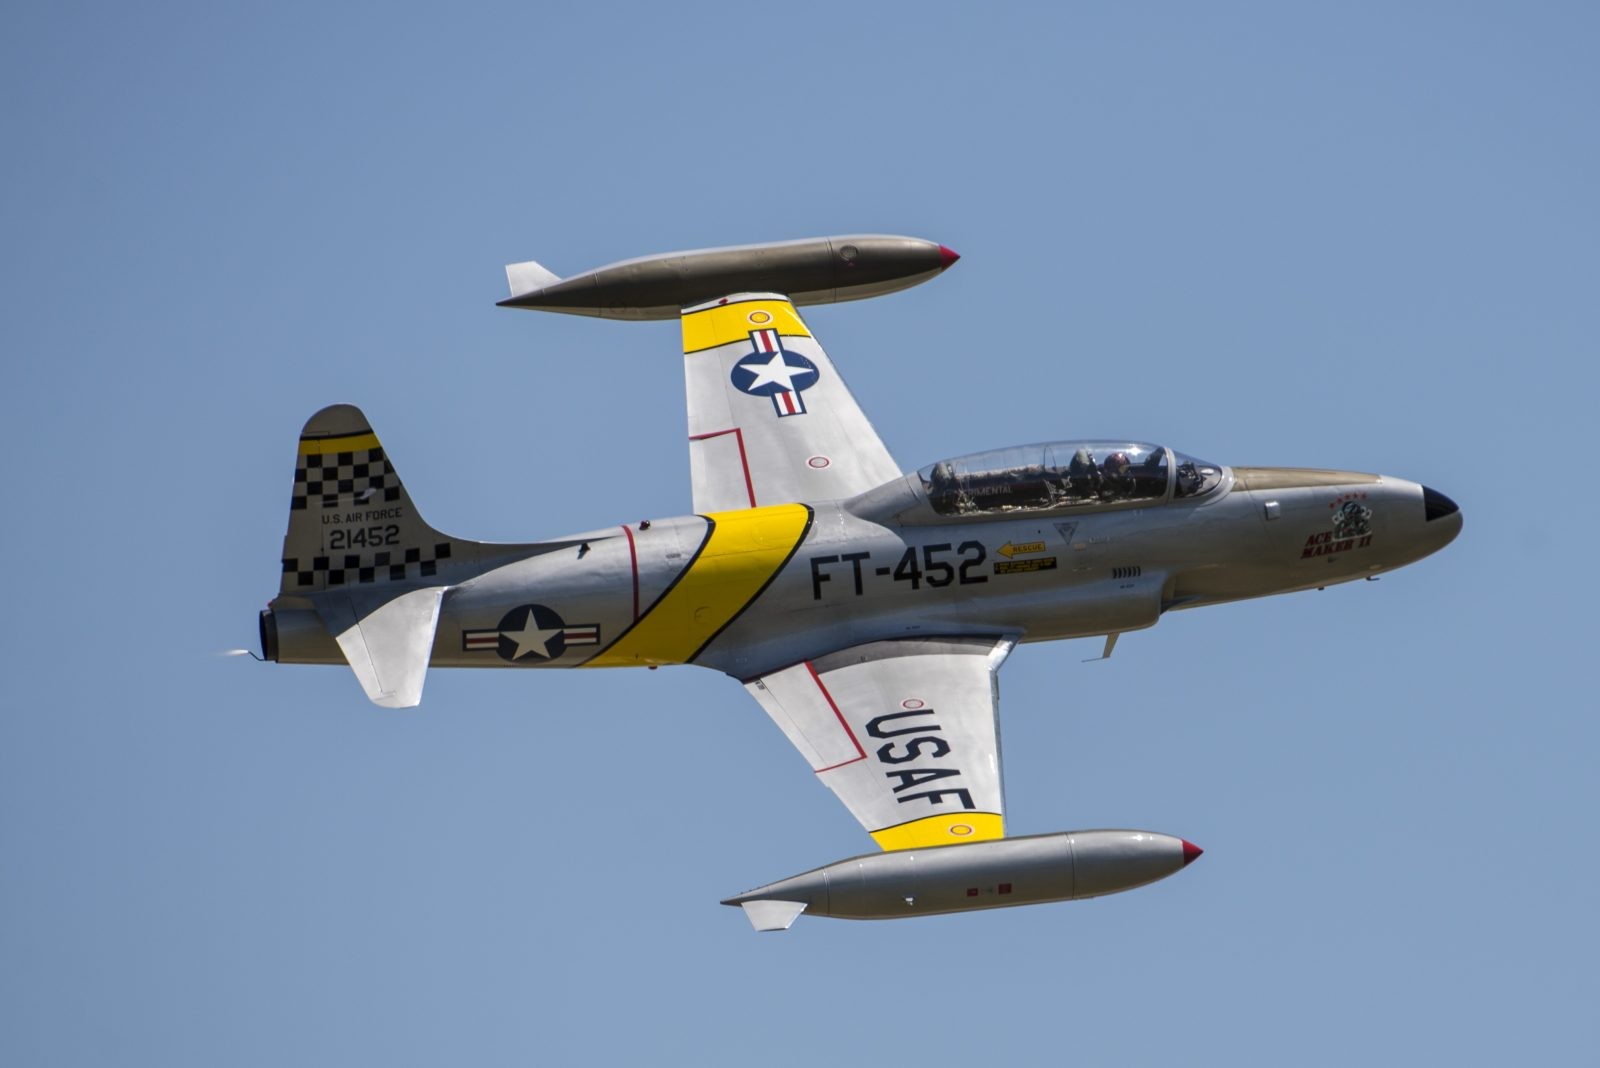 Amazing facts about the Lockheed T-33 Shooting Star; The trainer aircraft